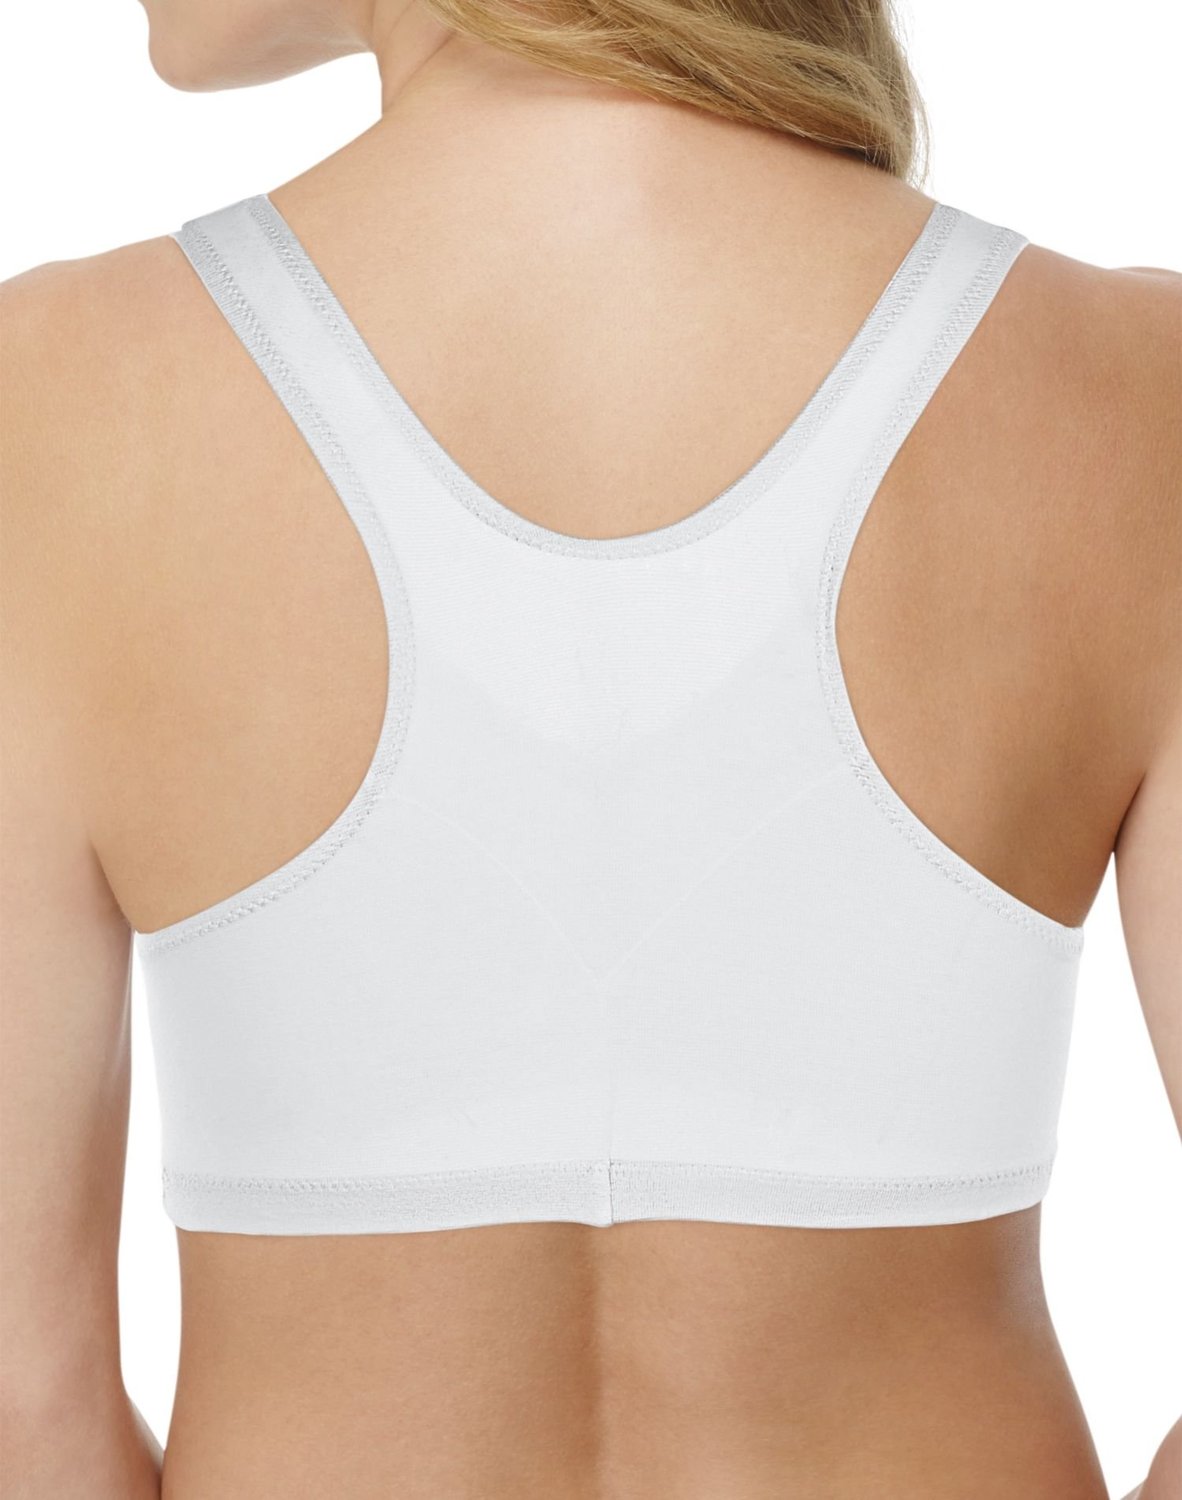 Hanes Women's ComfortBlend with X-Temp Pullover Bra - 2 Pack in White  (MHH570), Size Small